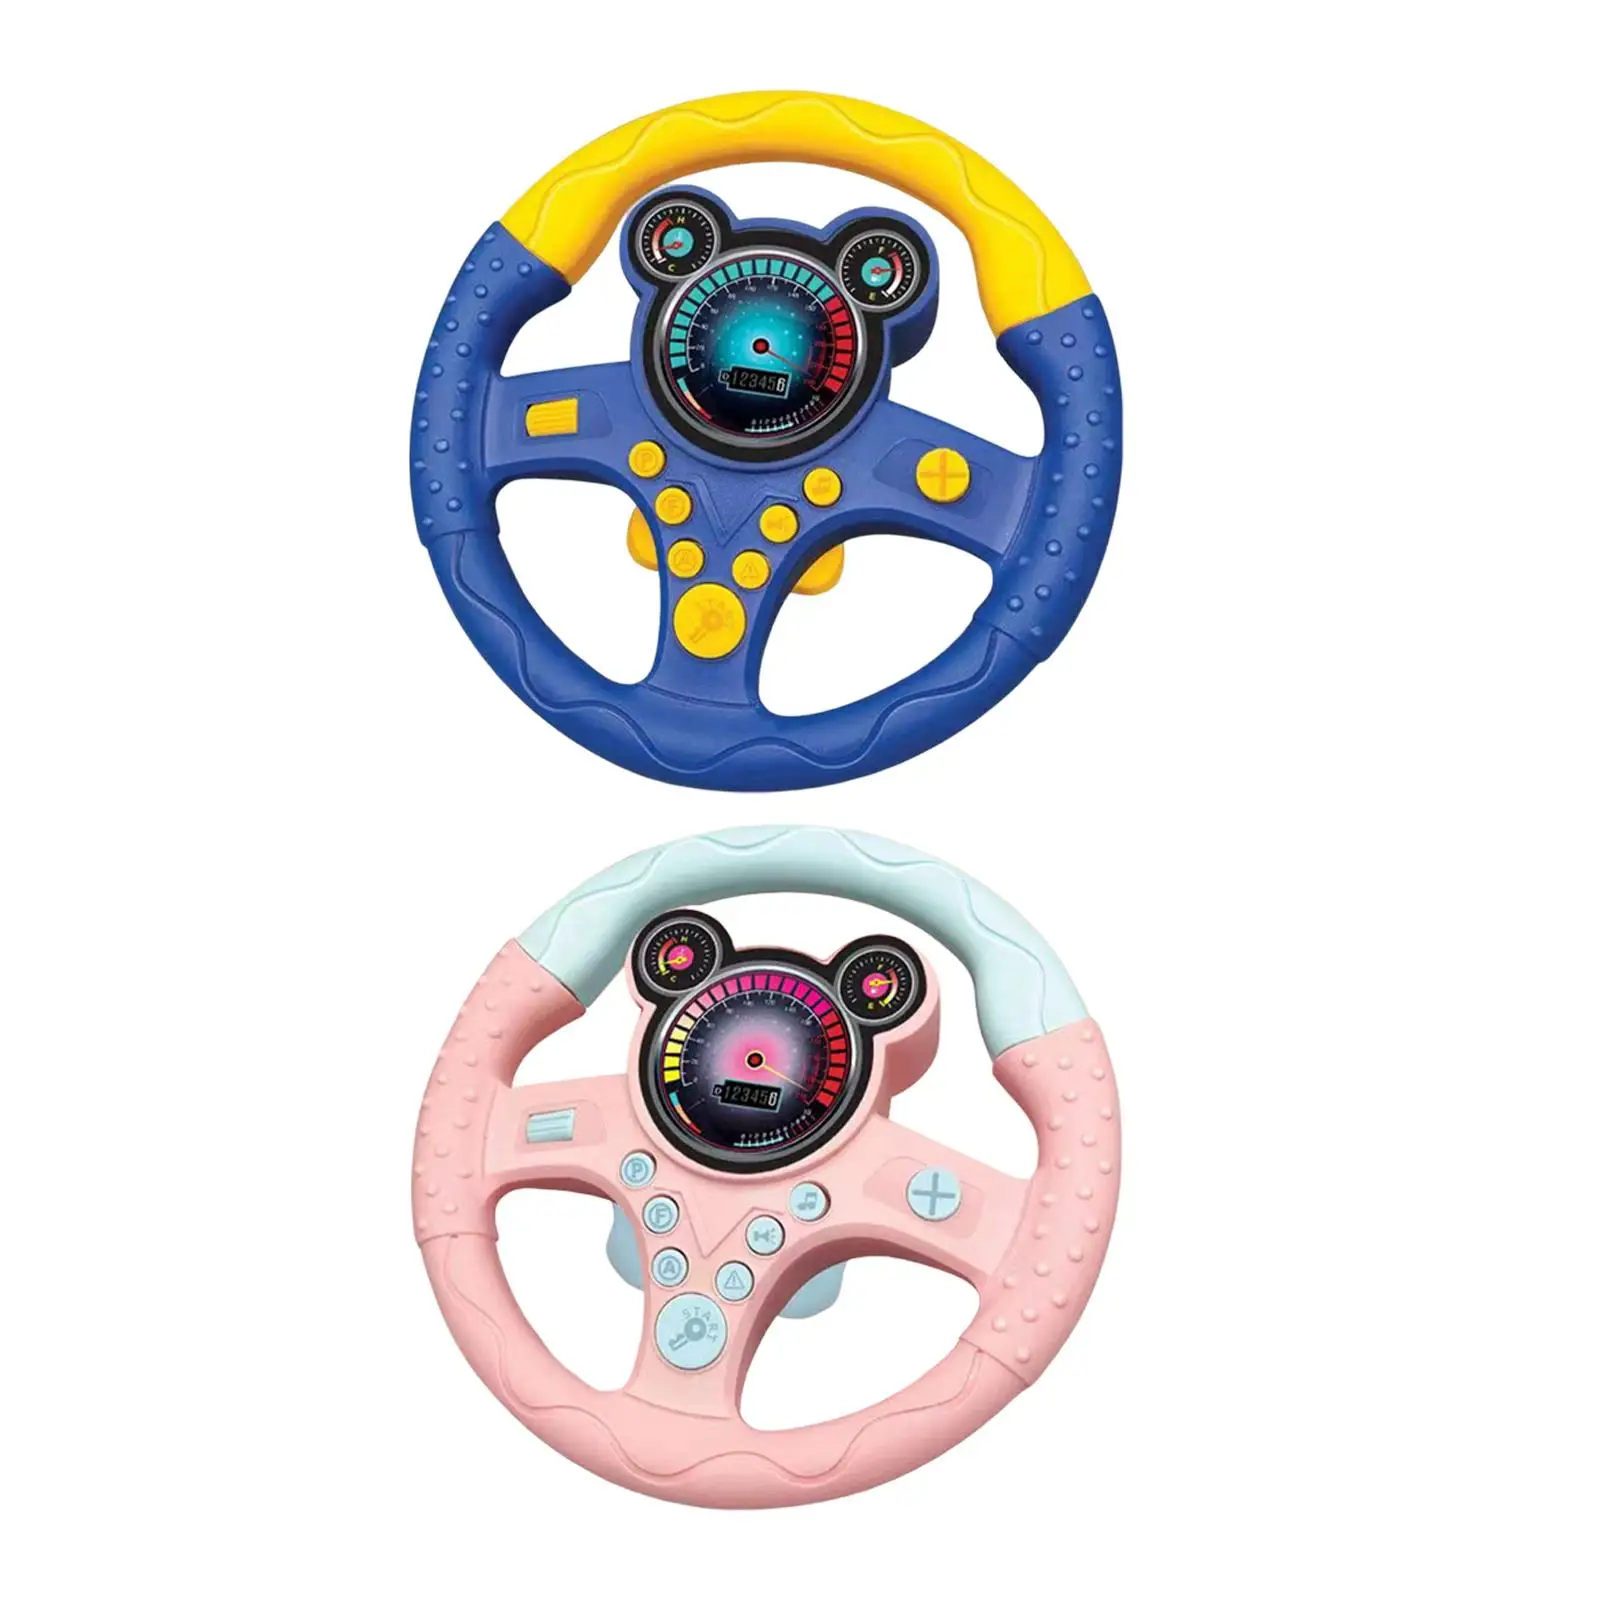 Simulation Steering Wheel Toy with Music Driving Pretend Play Driving Toy for Playground Garden Amusement Park Busy Board Gifts